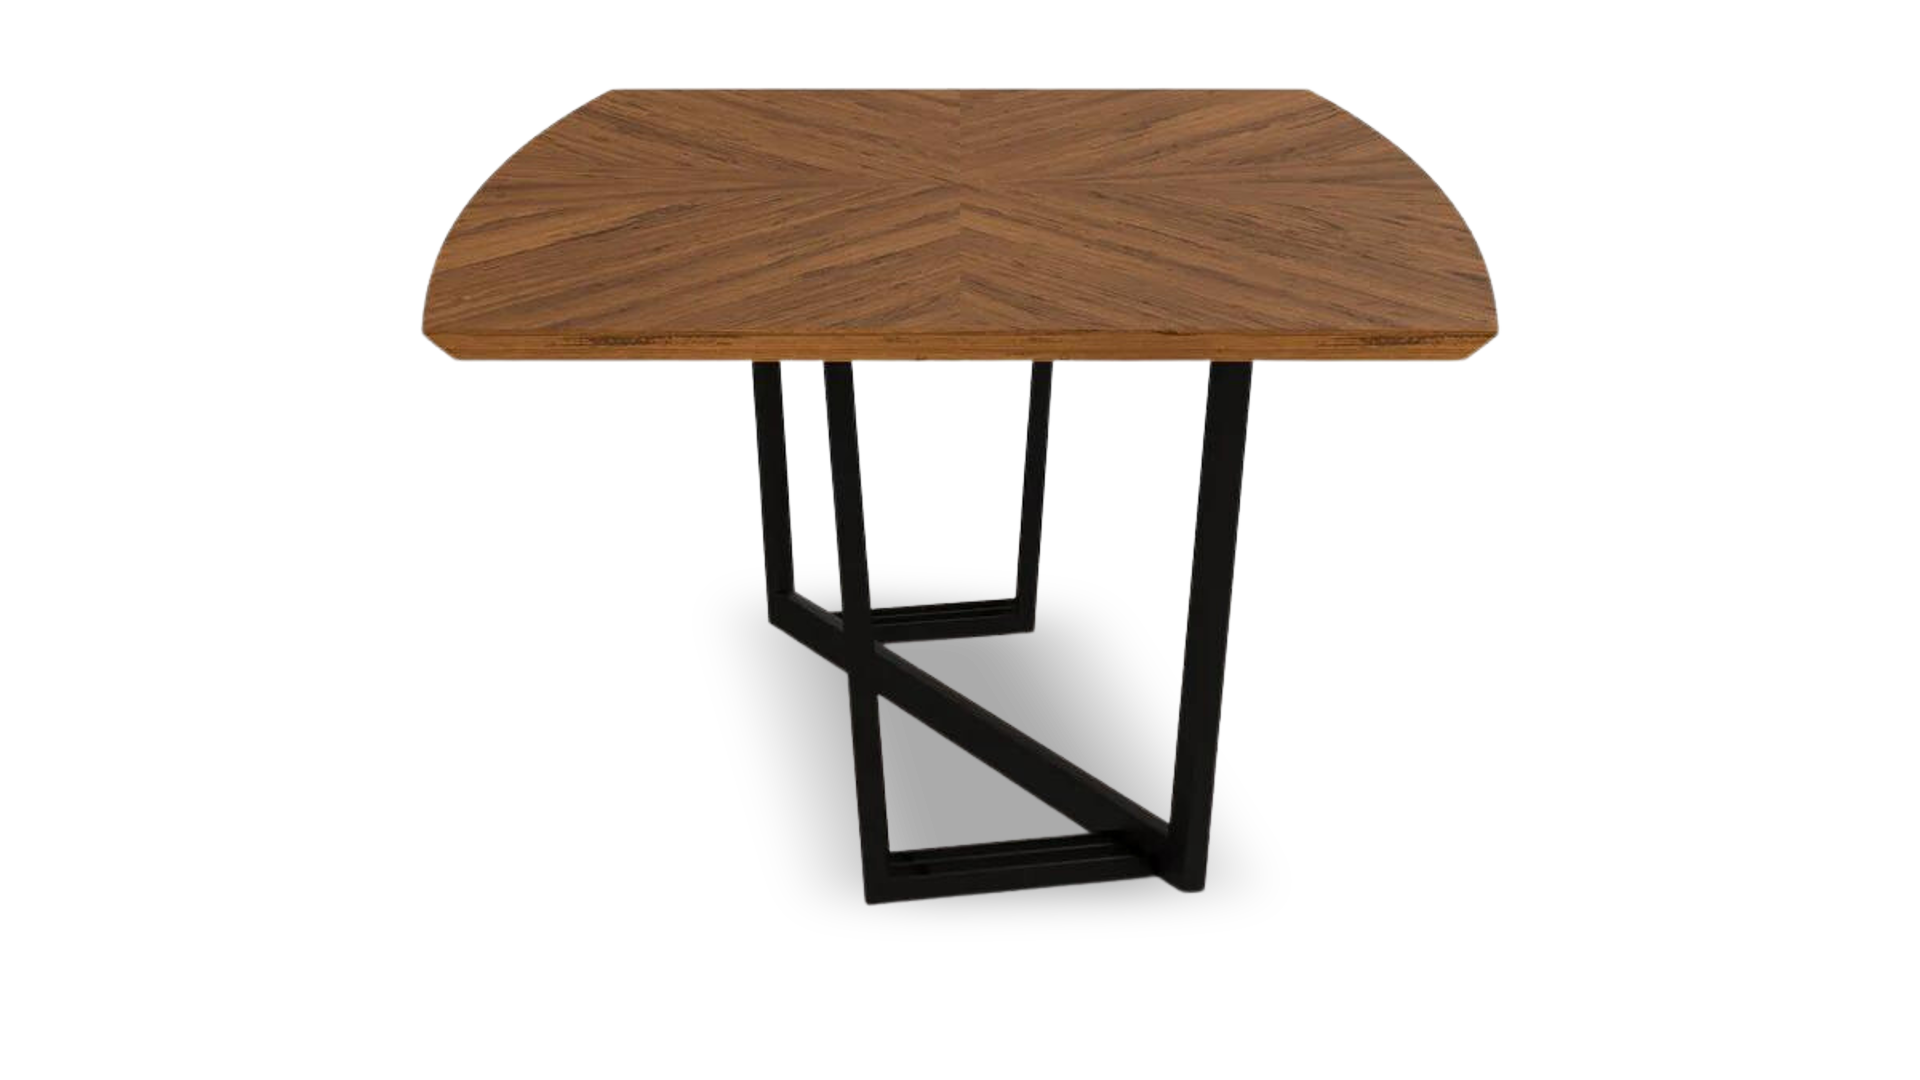 Nancy Dining Table